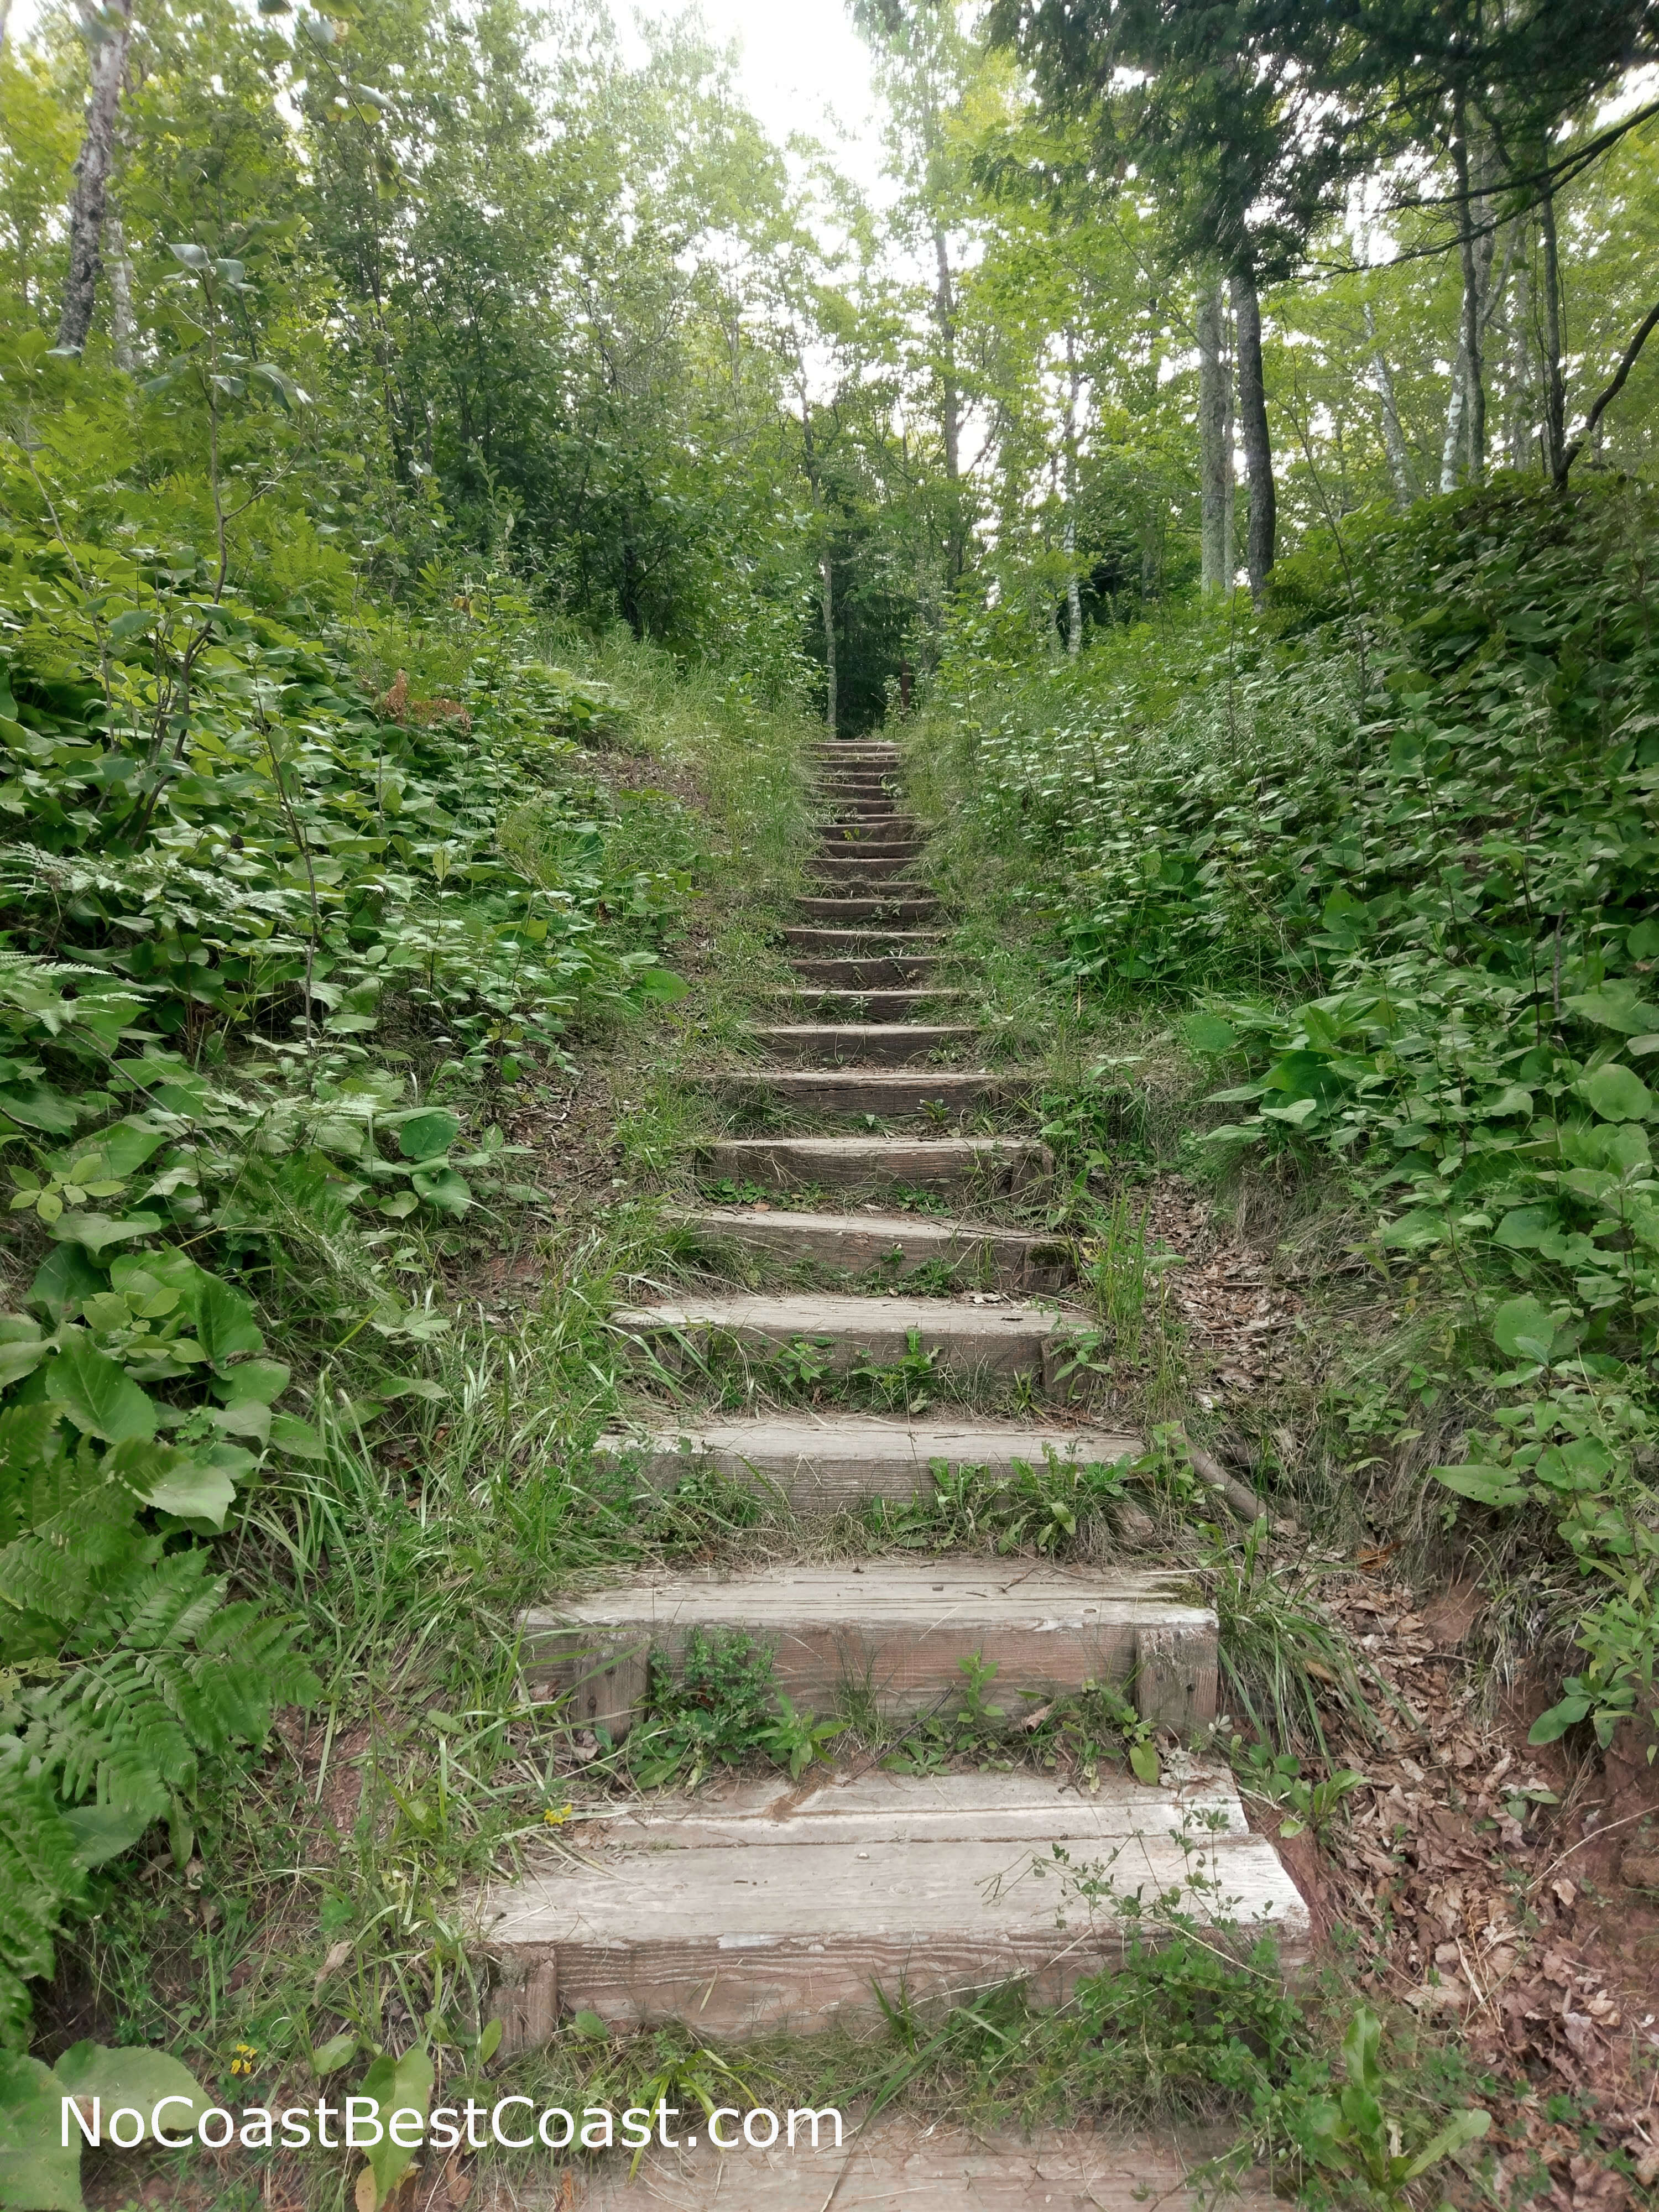 You must conquer a separate set of stairs at some point near all five waterfalls